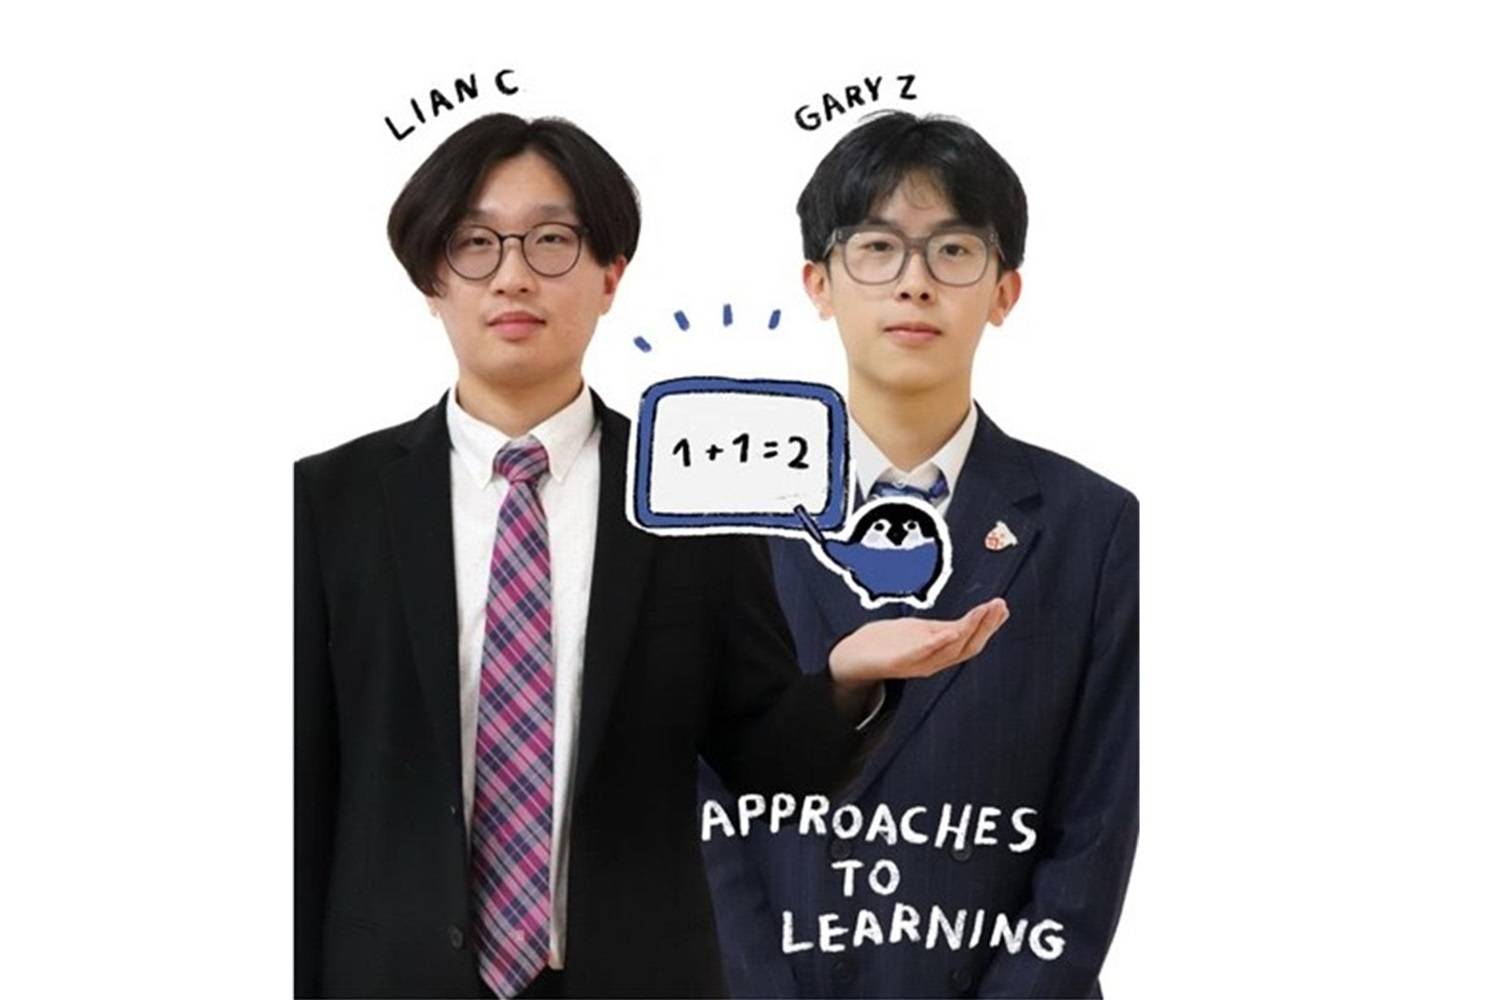 Approaches to Learning Prefects: Lian C and Gary Z